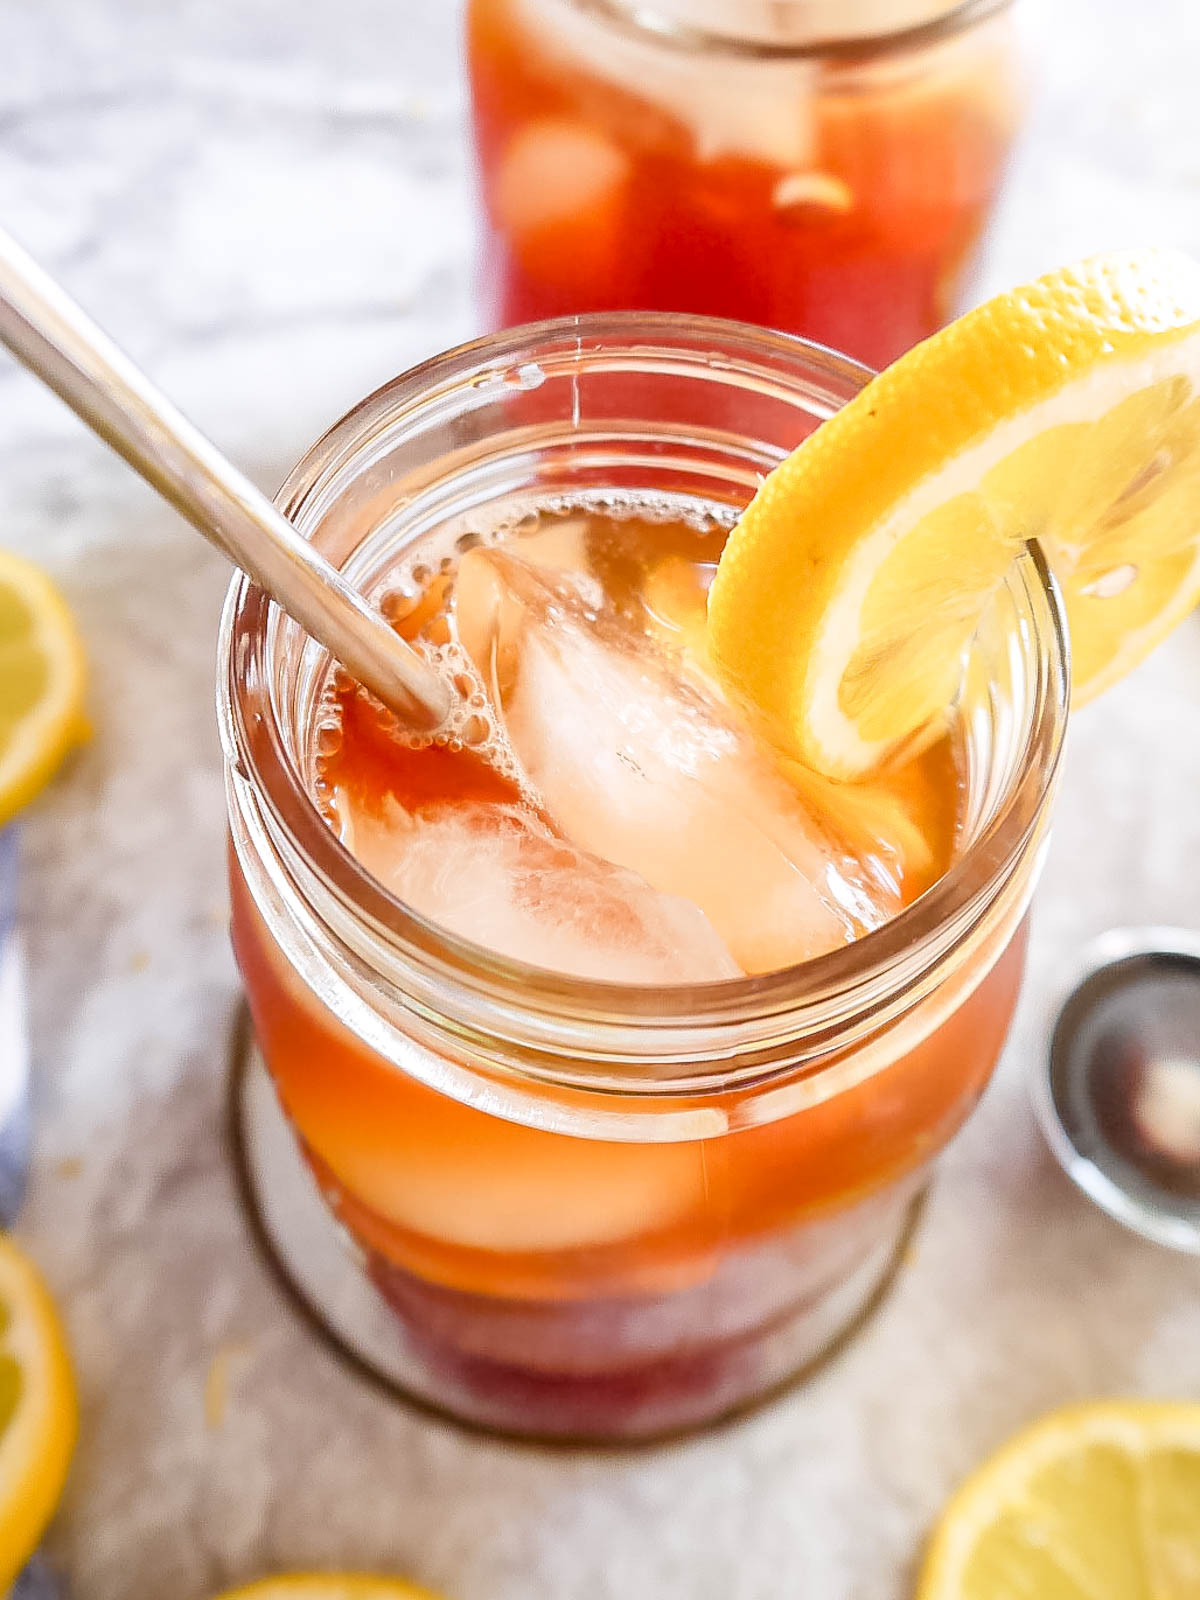 Sugar free iced tea in a glass with lemon.